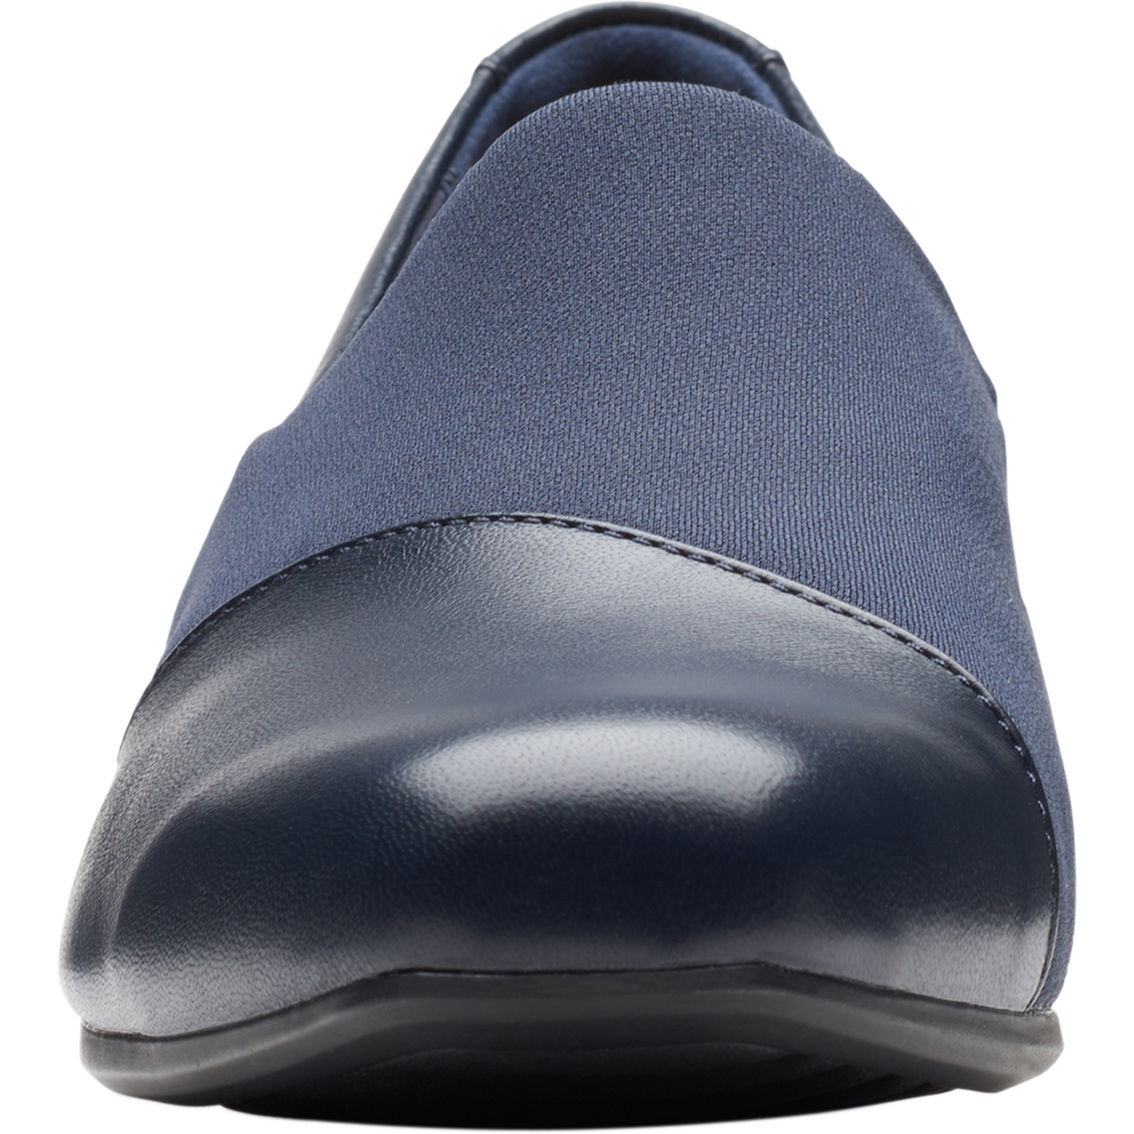 Clarks Women's Juliet Gem Leather Slip-On Casual Shoes - Image 6 of 7